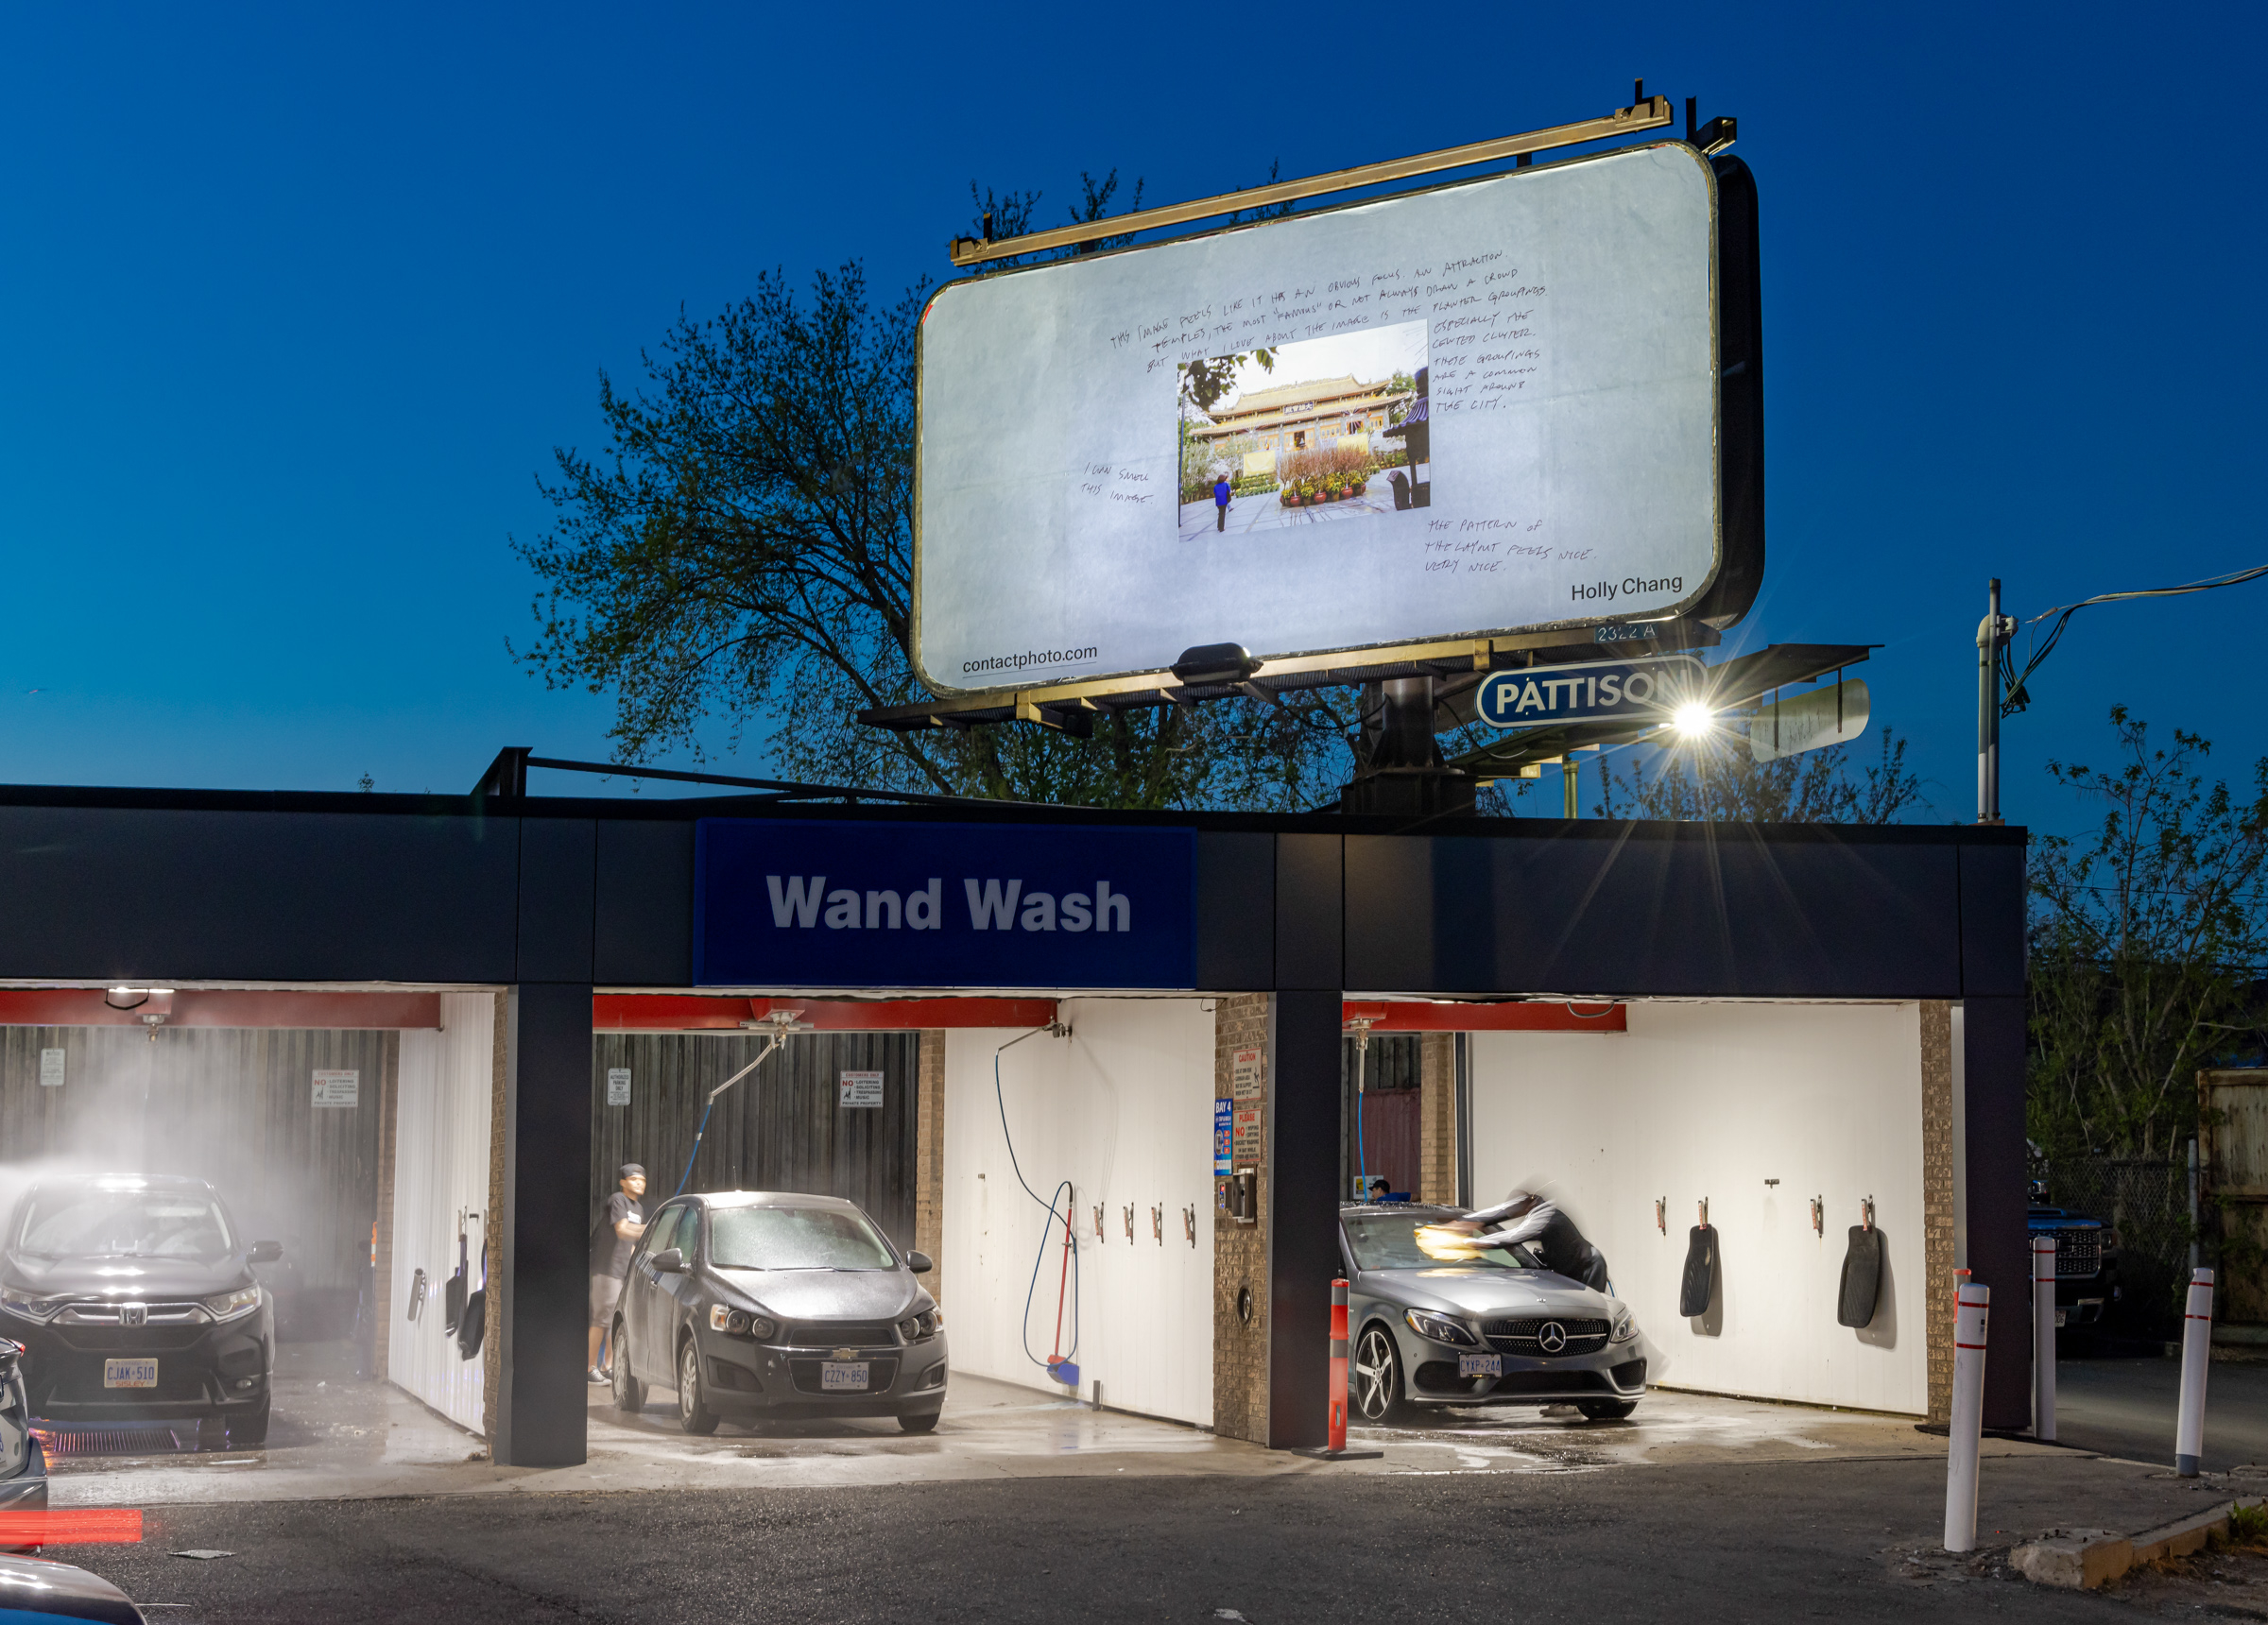     Holly Chang, How to Disappear When No One is Looking, 2024, installation view, billboards at Dupont St and Emerson Ave, Courtesy of the artist and CONTACT Photography Festival. Photo: Toni Hafkenscheid

